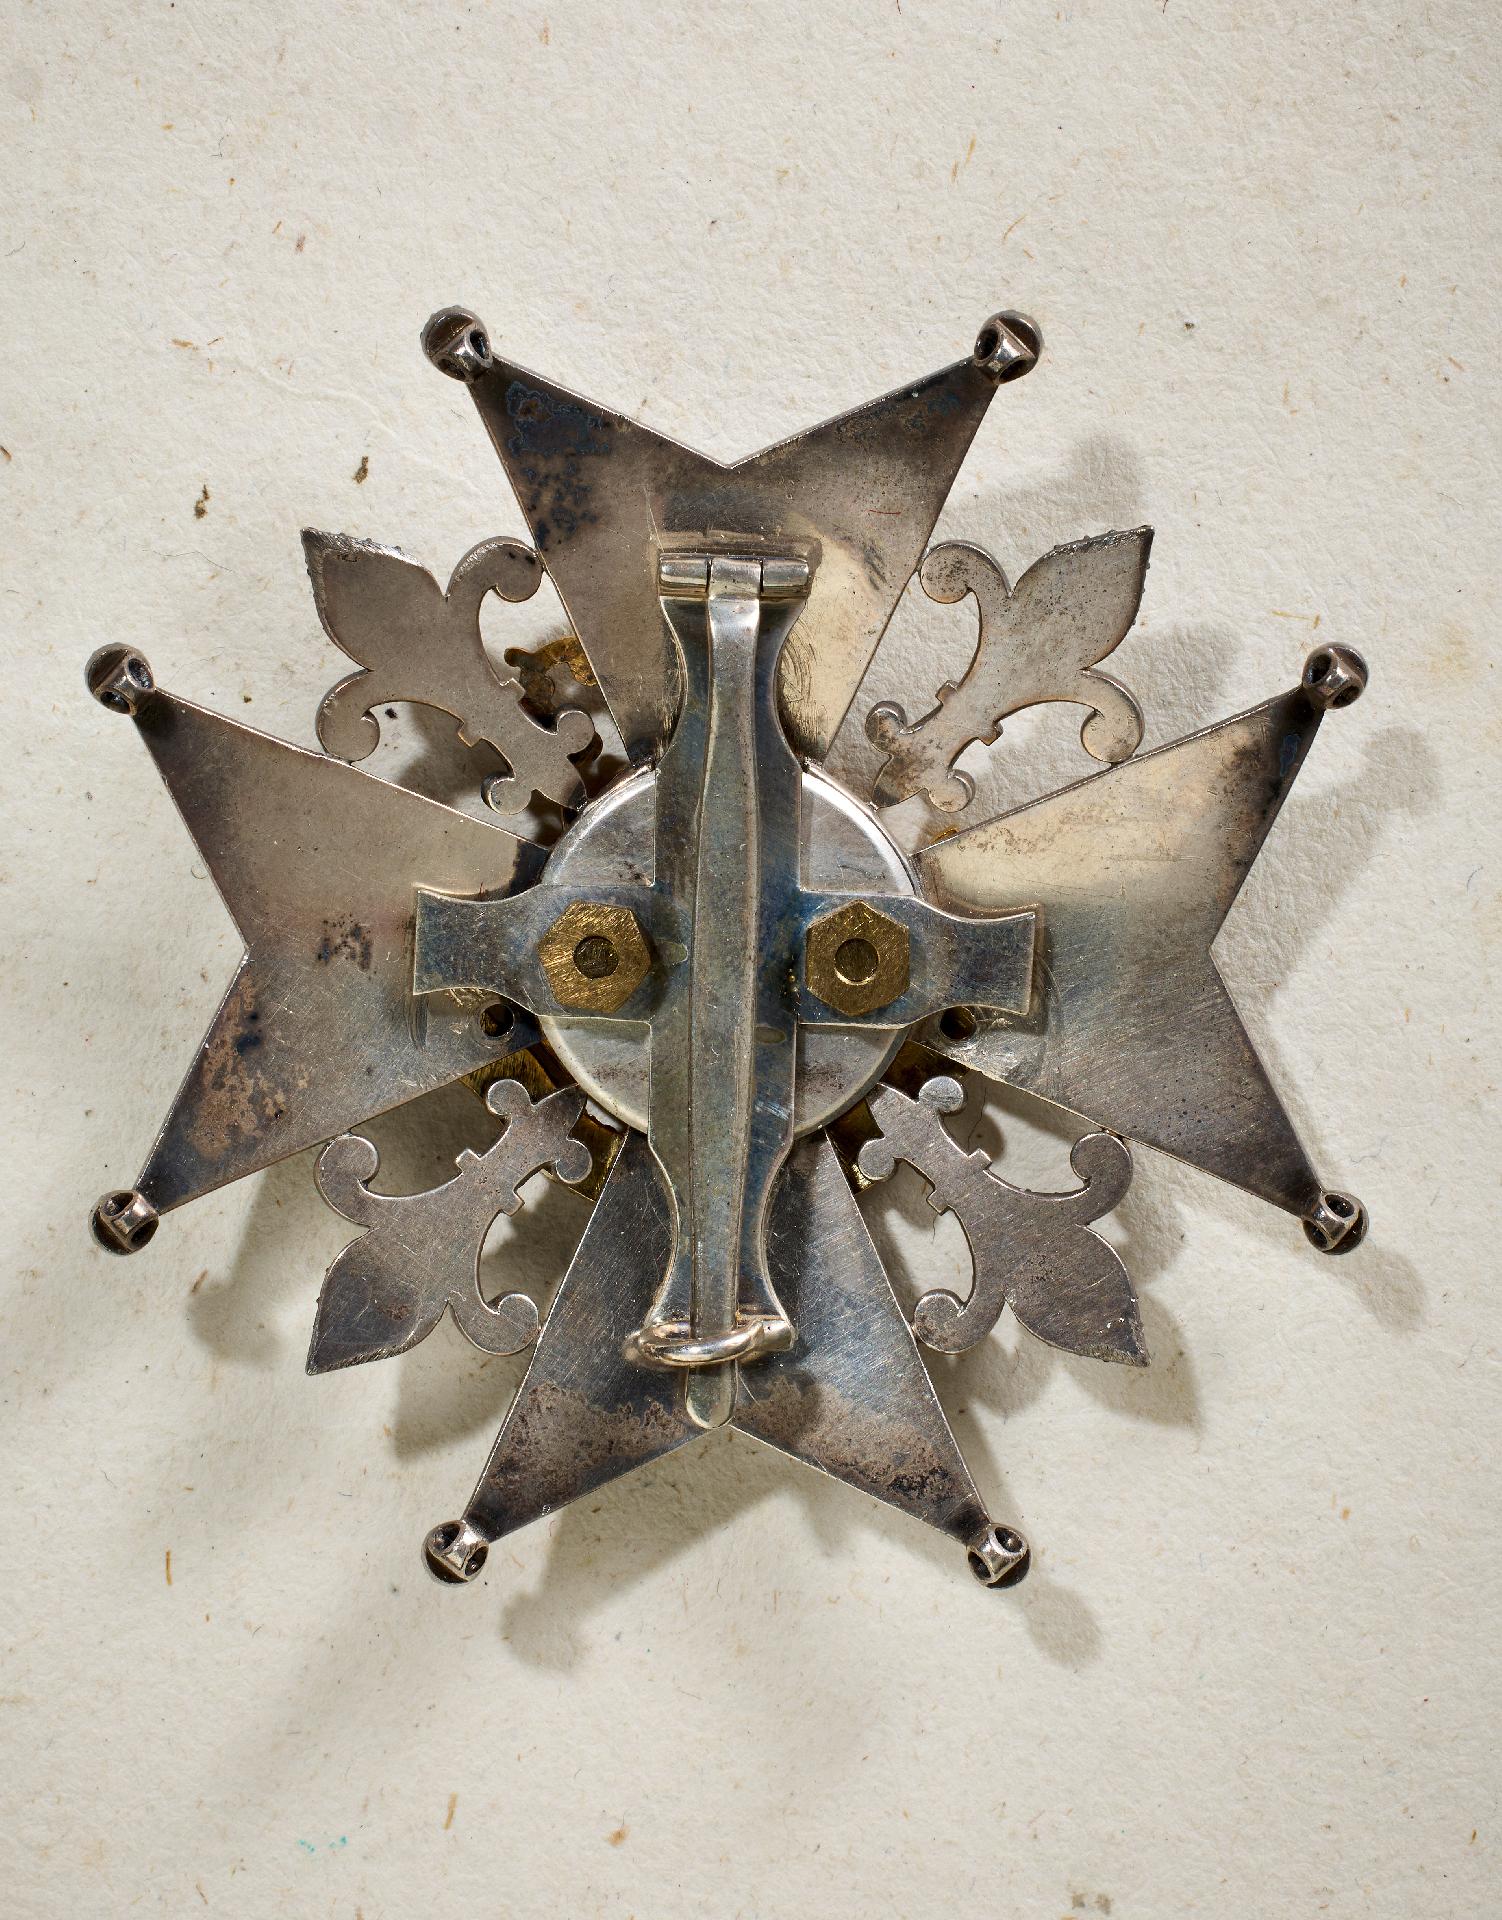 Königreich beider Sizilien : Order of St. Januarius Breast Star to the Ornamented Necklace. - Image 3 of 6